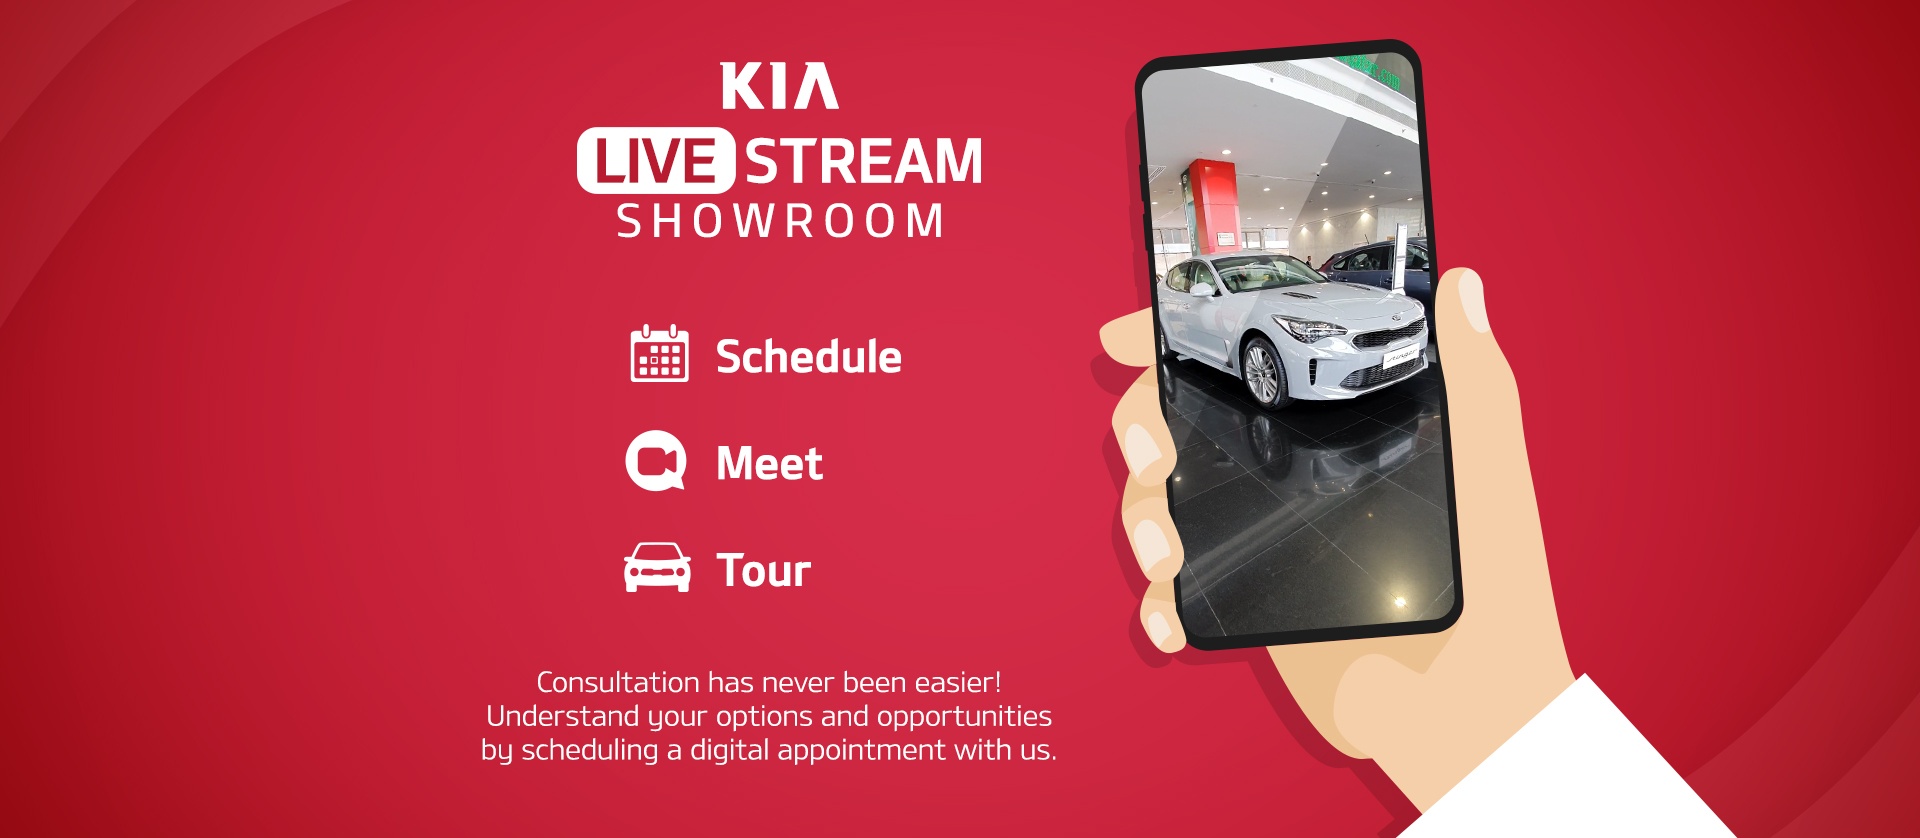 KIA LAUNCHES ‘LIVE STREAM SHOWROOM’ TO OFFER CUSTOMERS AN INNOVATIVE DIGITAL EXPERIENCE